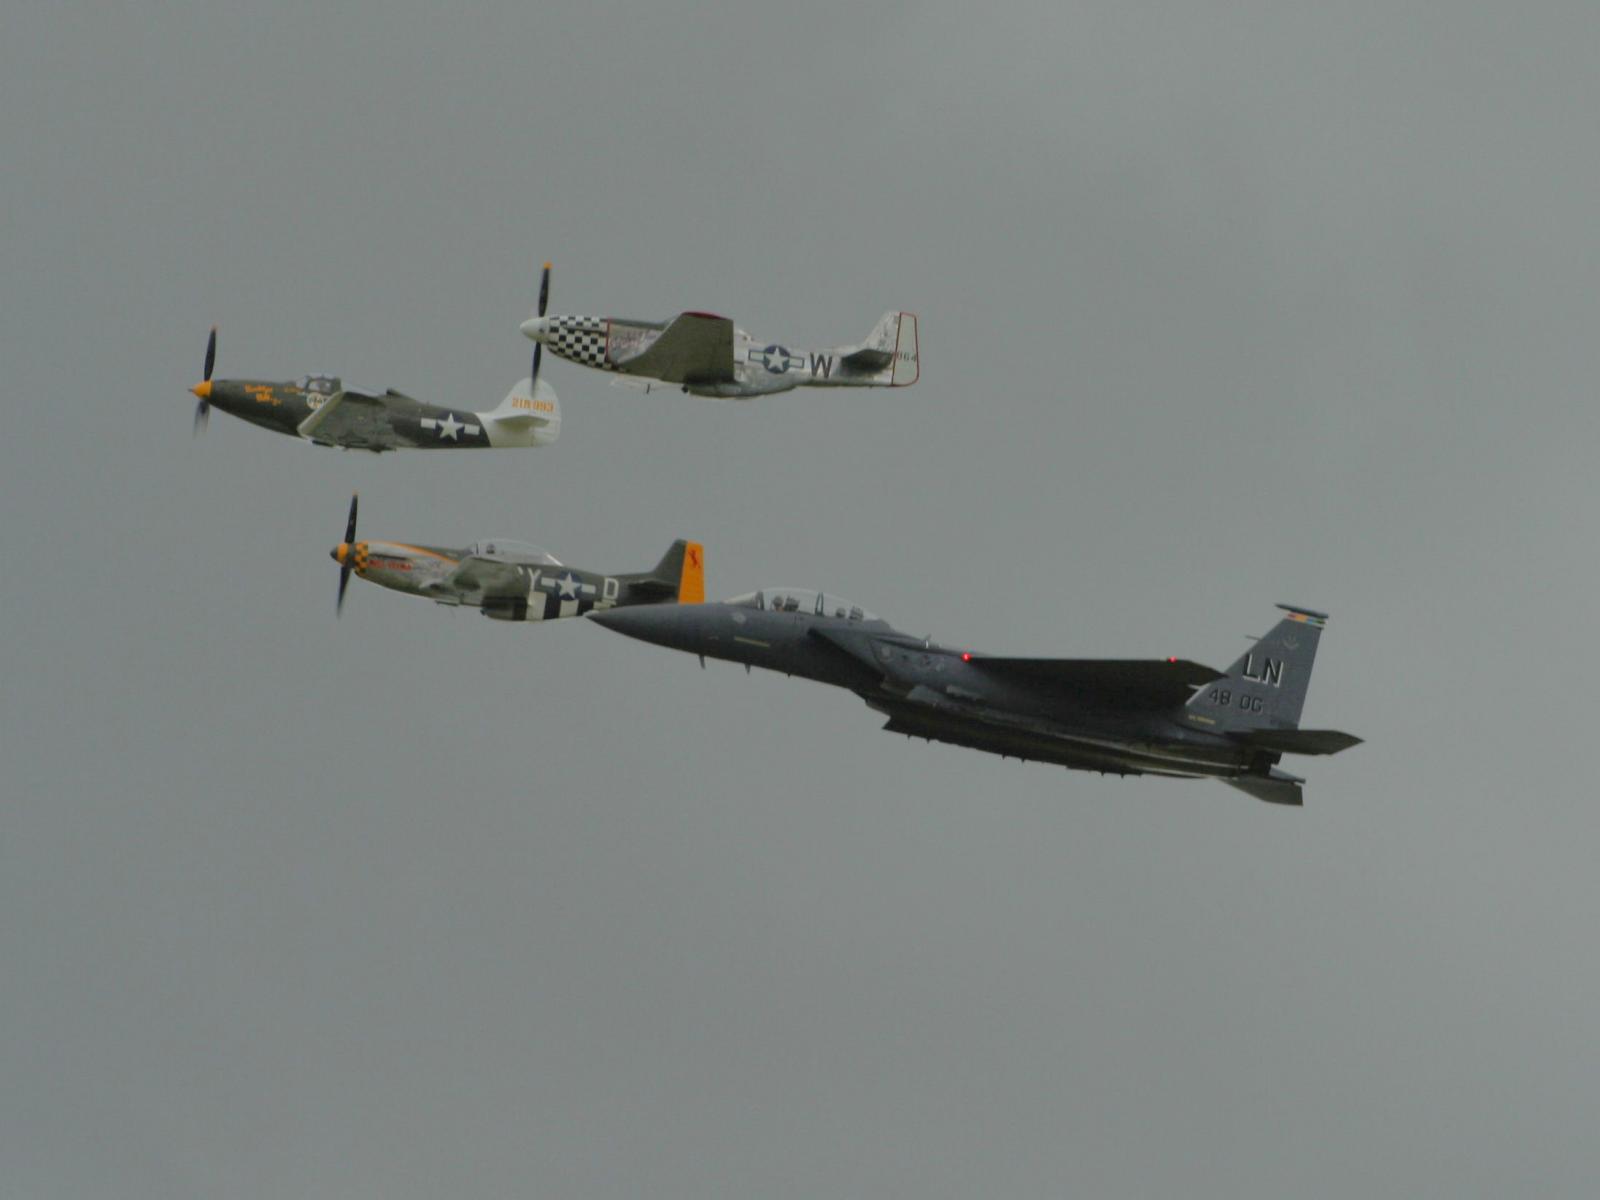 More information about "Duxford Historic Flight #2"